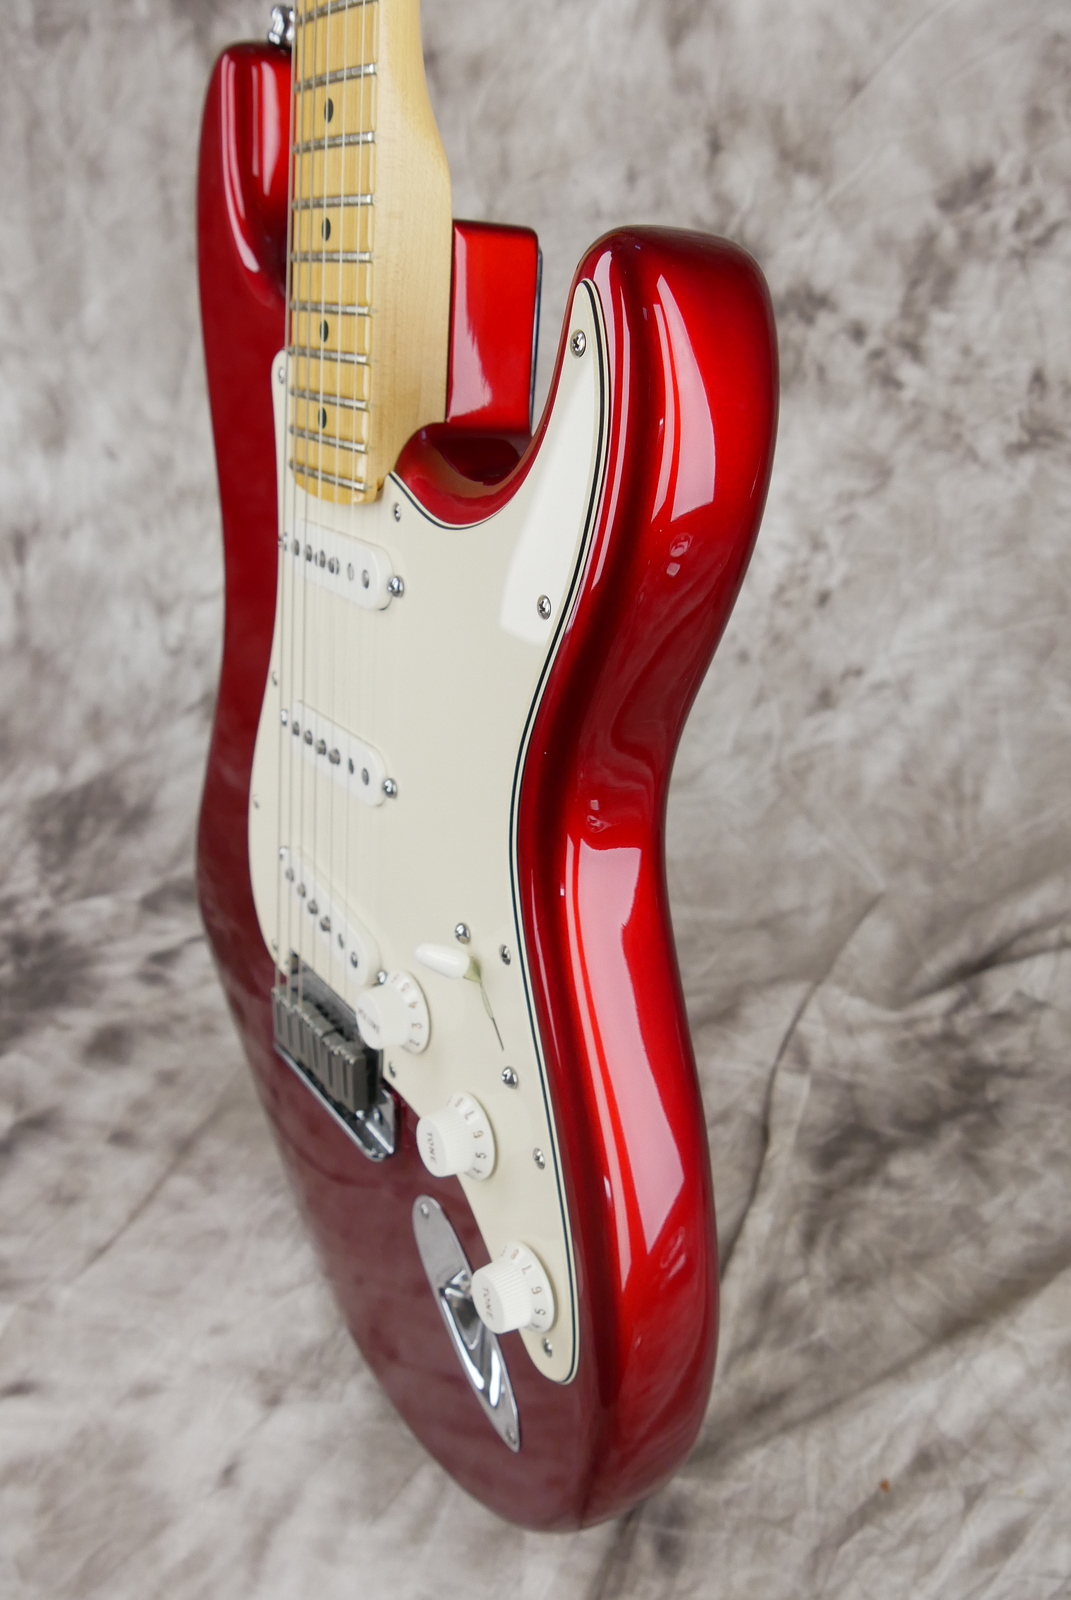 img/vintage/5279/Fender_Stratocaster_USA_built_from_parts_candy_apple_red_2015-006.JPG